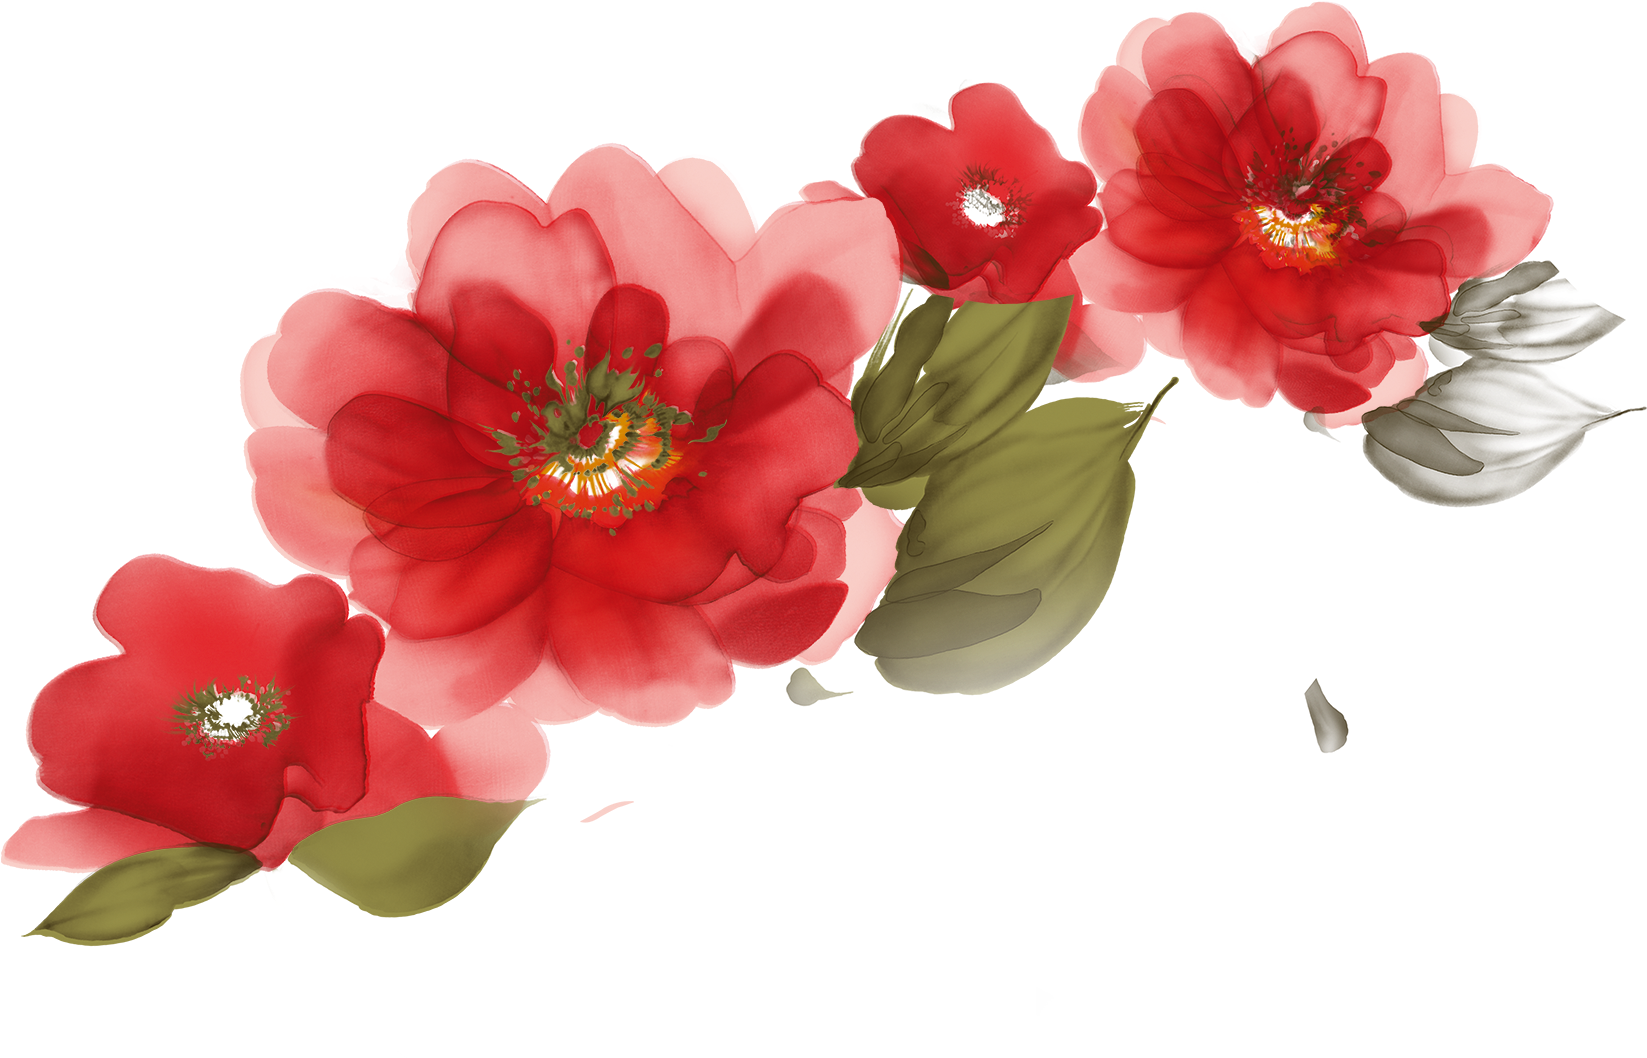 Vibrant Red Flowers Illustration PNG